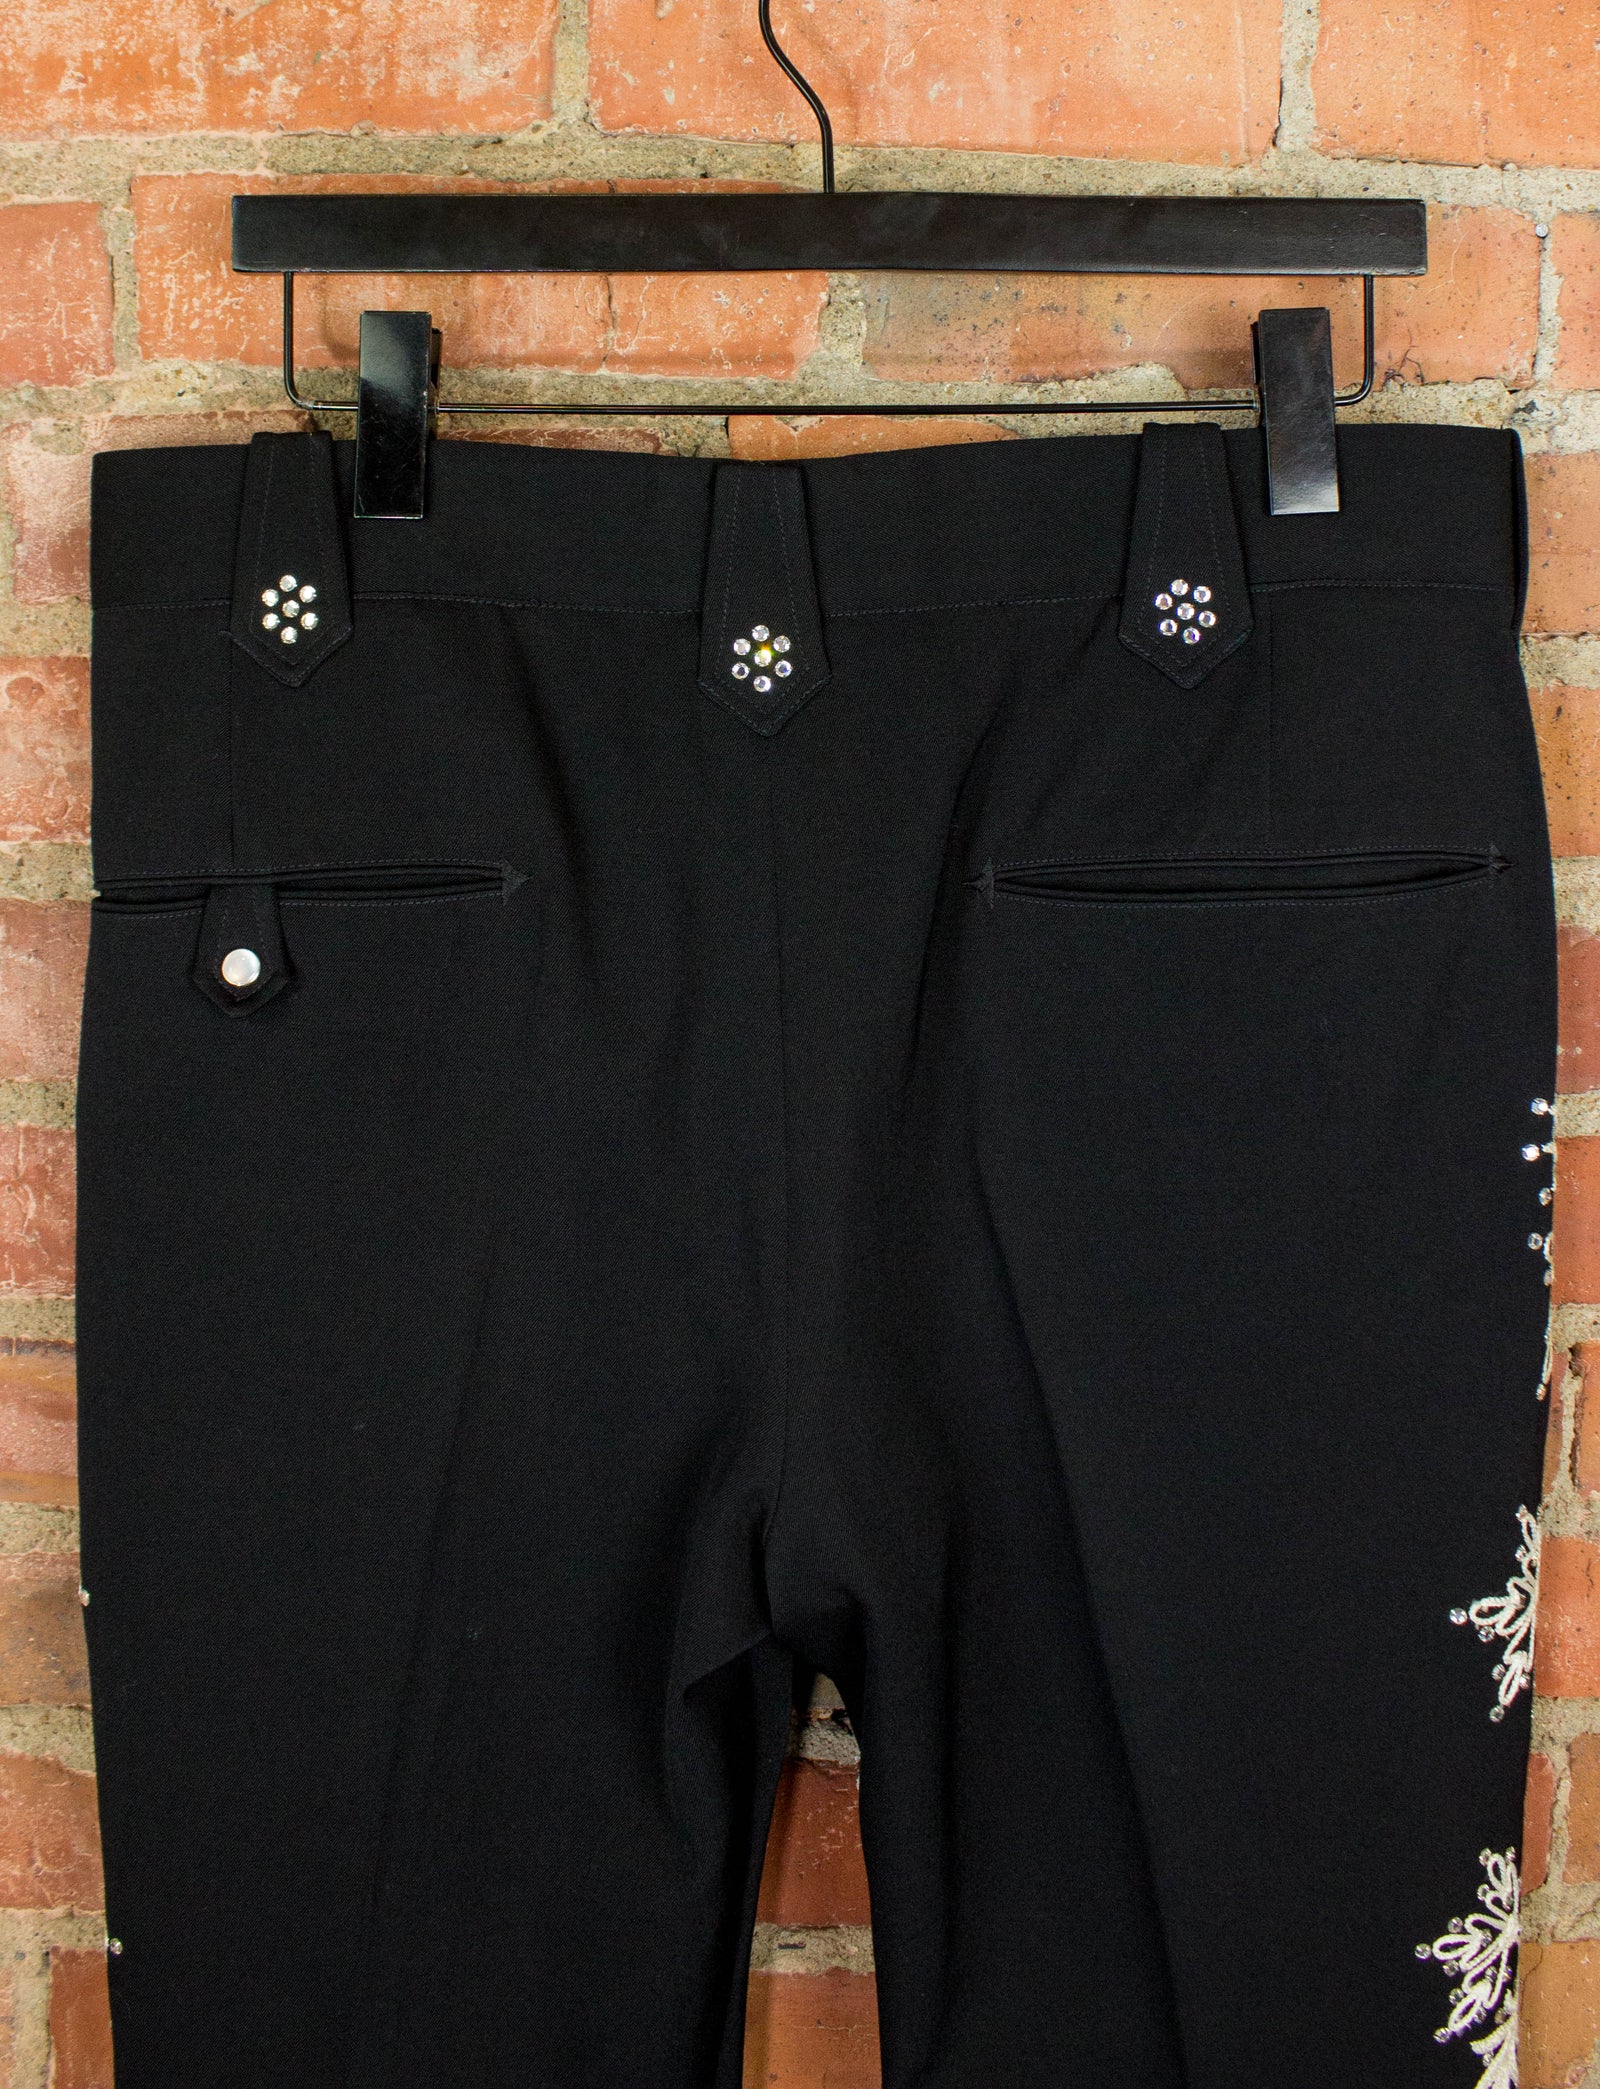 Vintage 70s Nudie's Rodeo Tailors Black and White Rhinestone and Chain Stitch Suit Pants 34x32